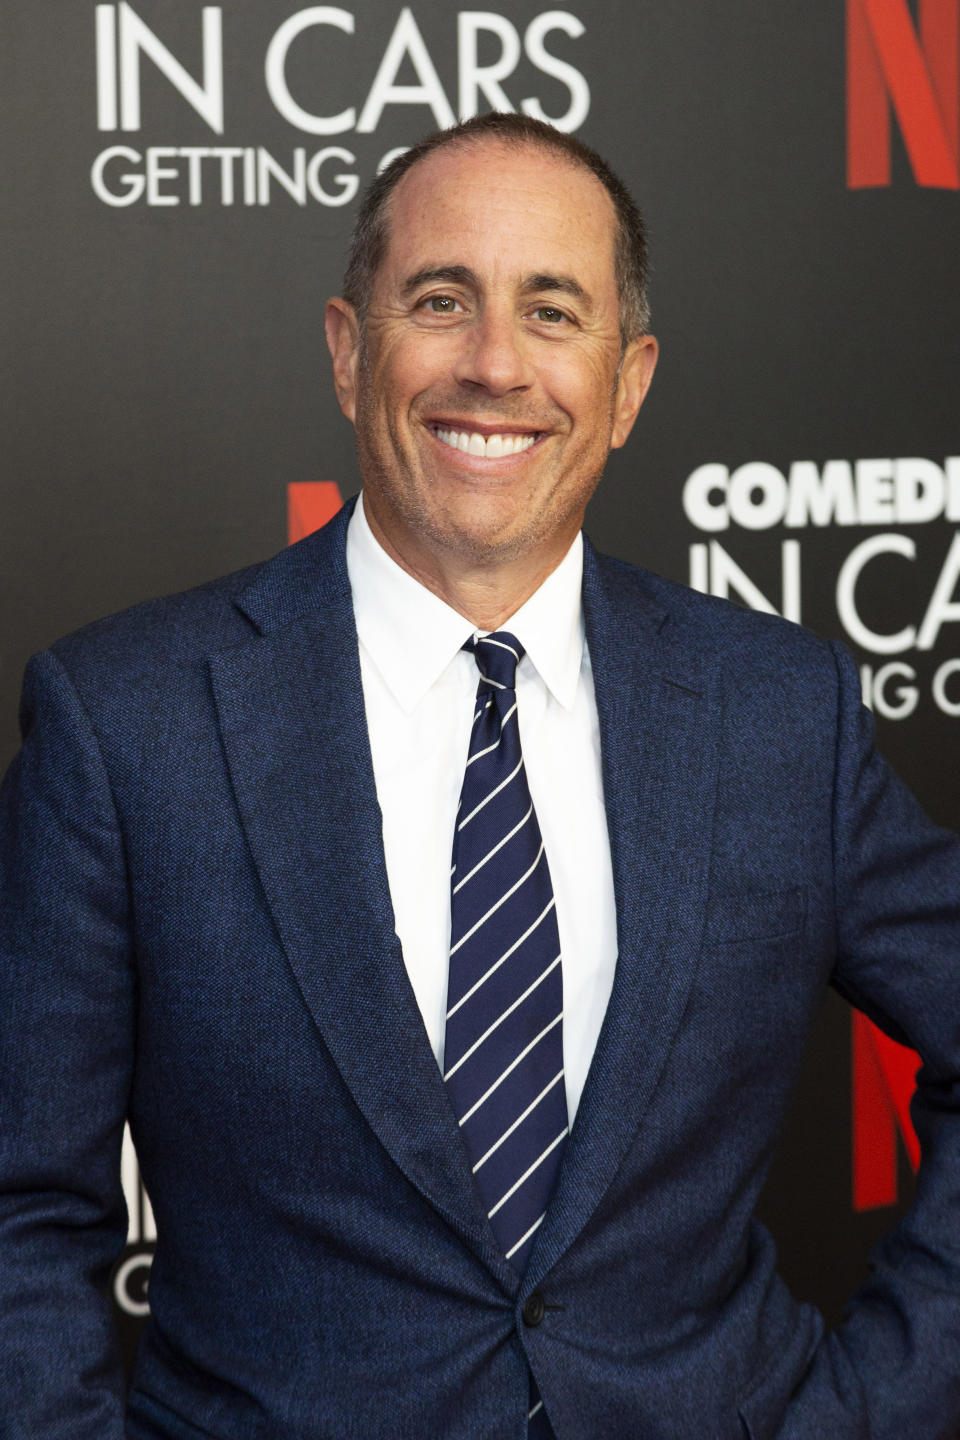 Jerry Seinfeld attends the "Comedians In Cars Getting Coffee," photo call at The Paley Center for Media, Wednesday, July 17, 2019, in Beverly Hills, Calif. (Photo by Willy Sanjuan/Invision/AP)